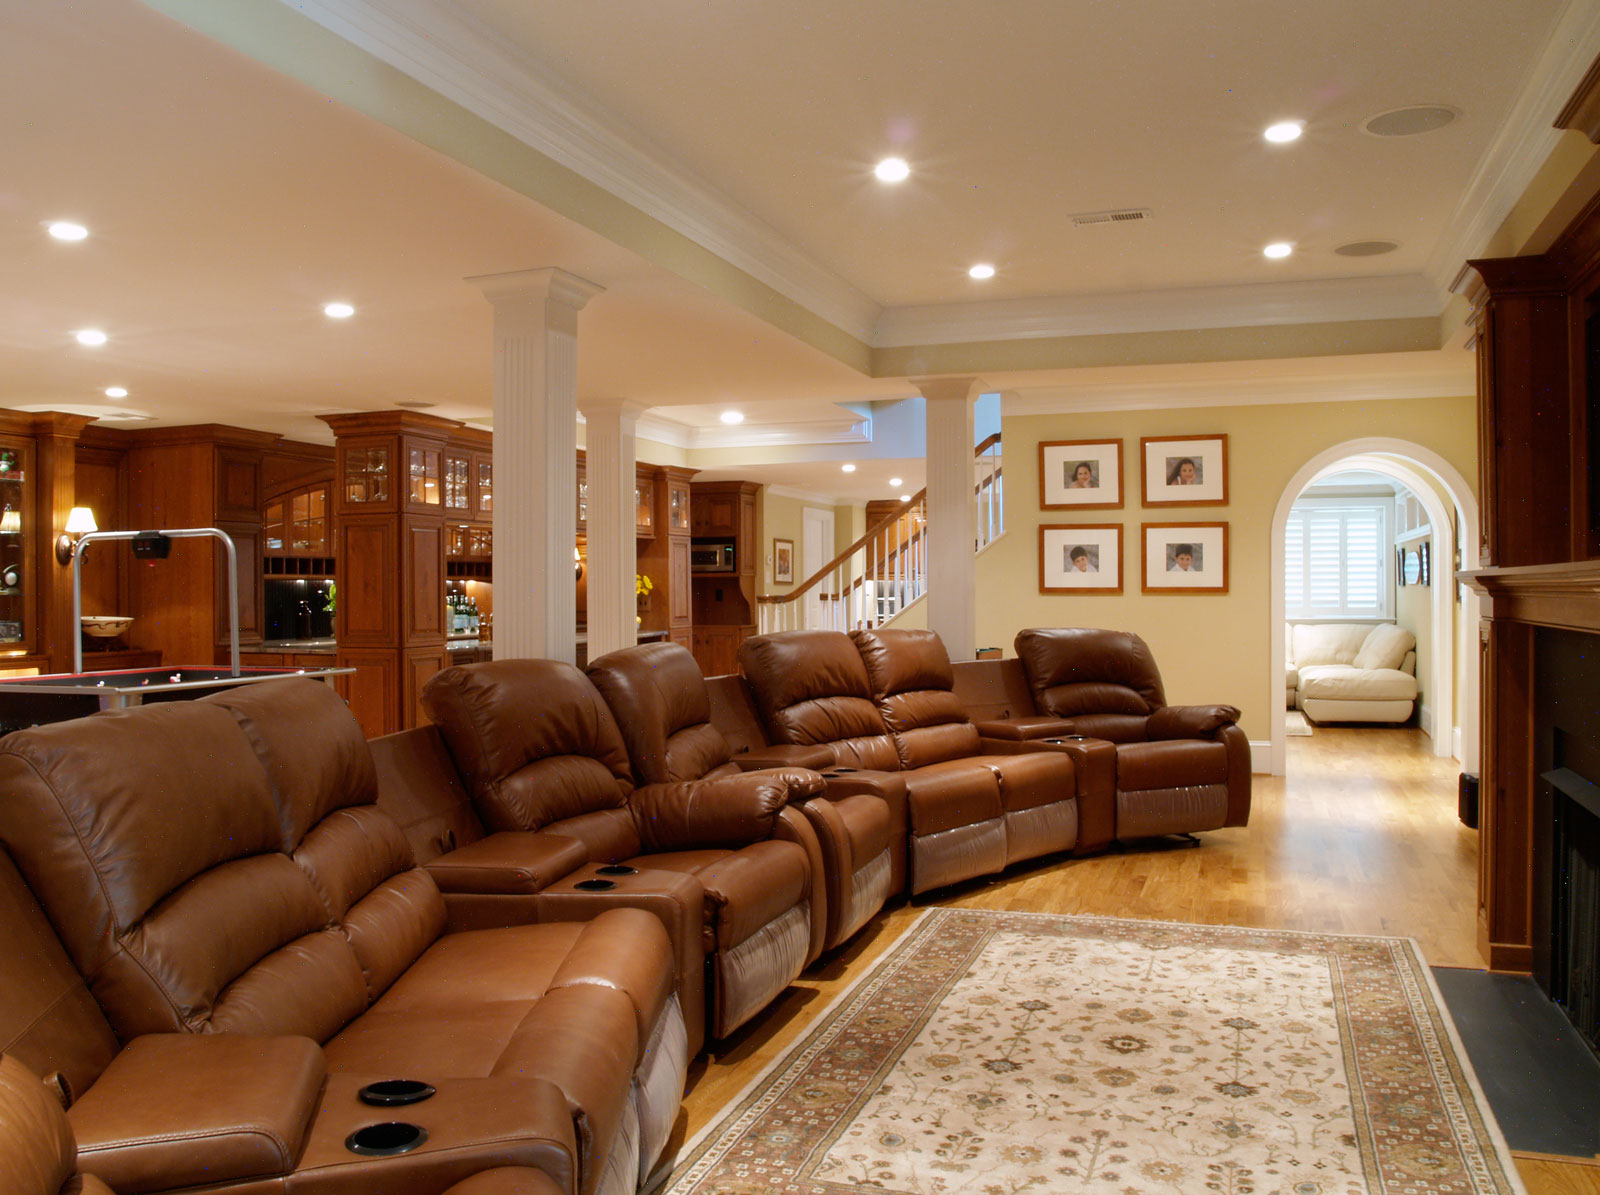 Basement Ideas Cinema Captivating Finished Basement Ideas For Home Cinema Room Decorated In Traditional Design Using Brown Leather Sofa And Vintage Rug Basement Finished Basement Ideas With Decorative Style